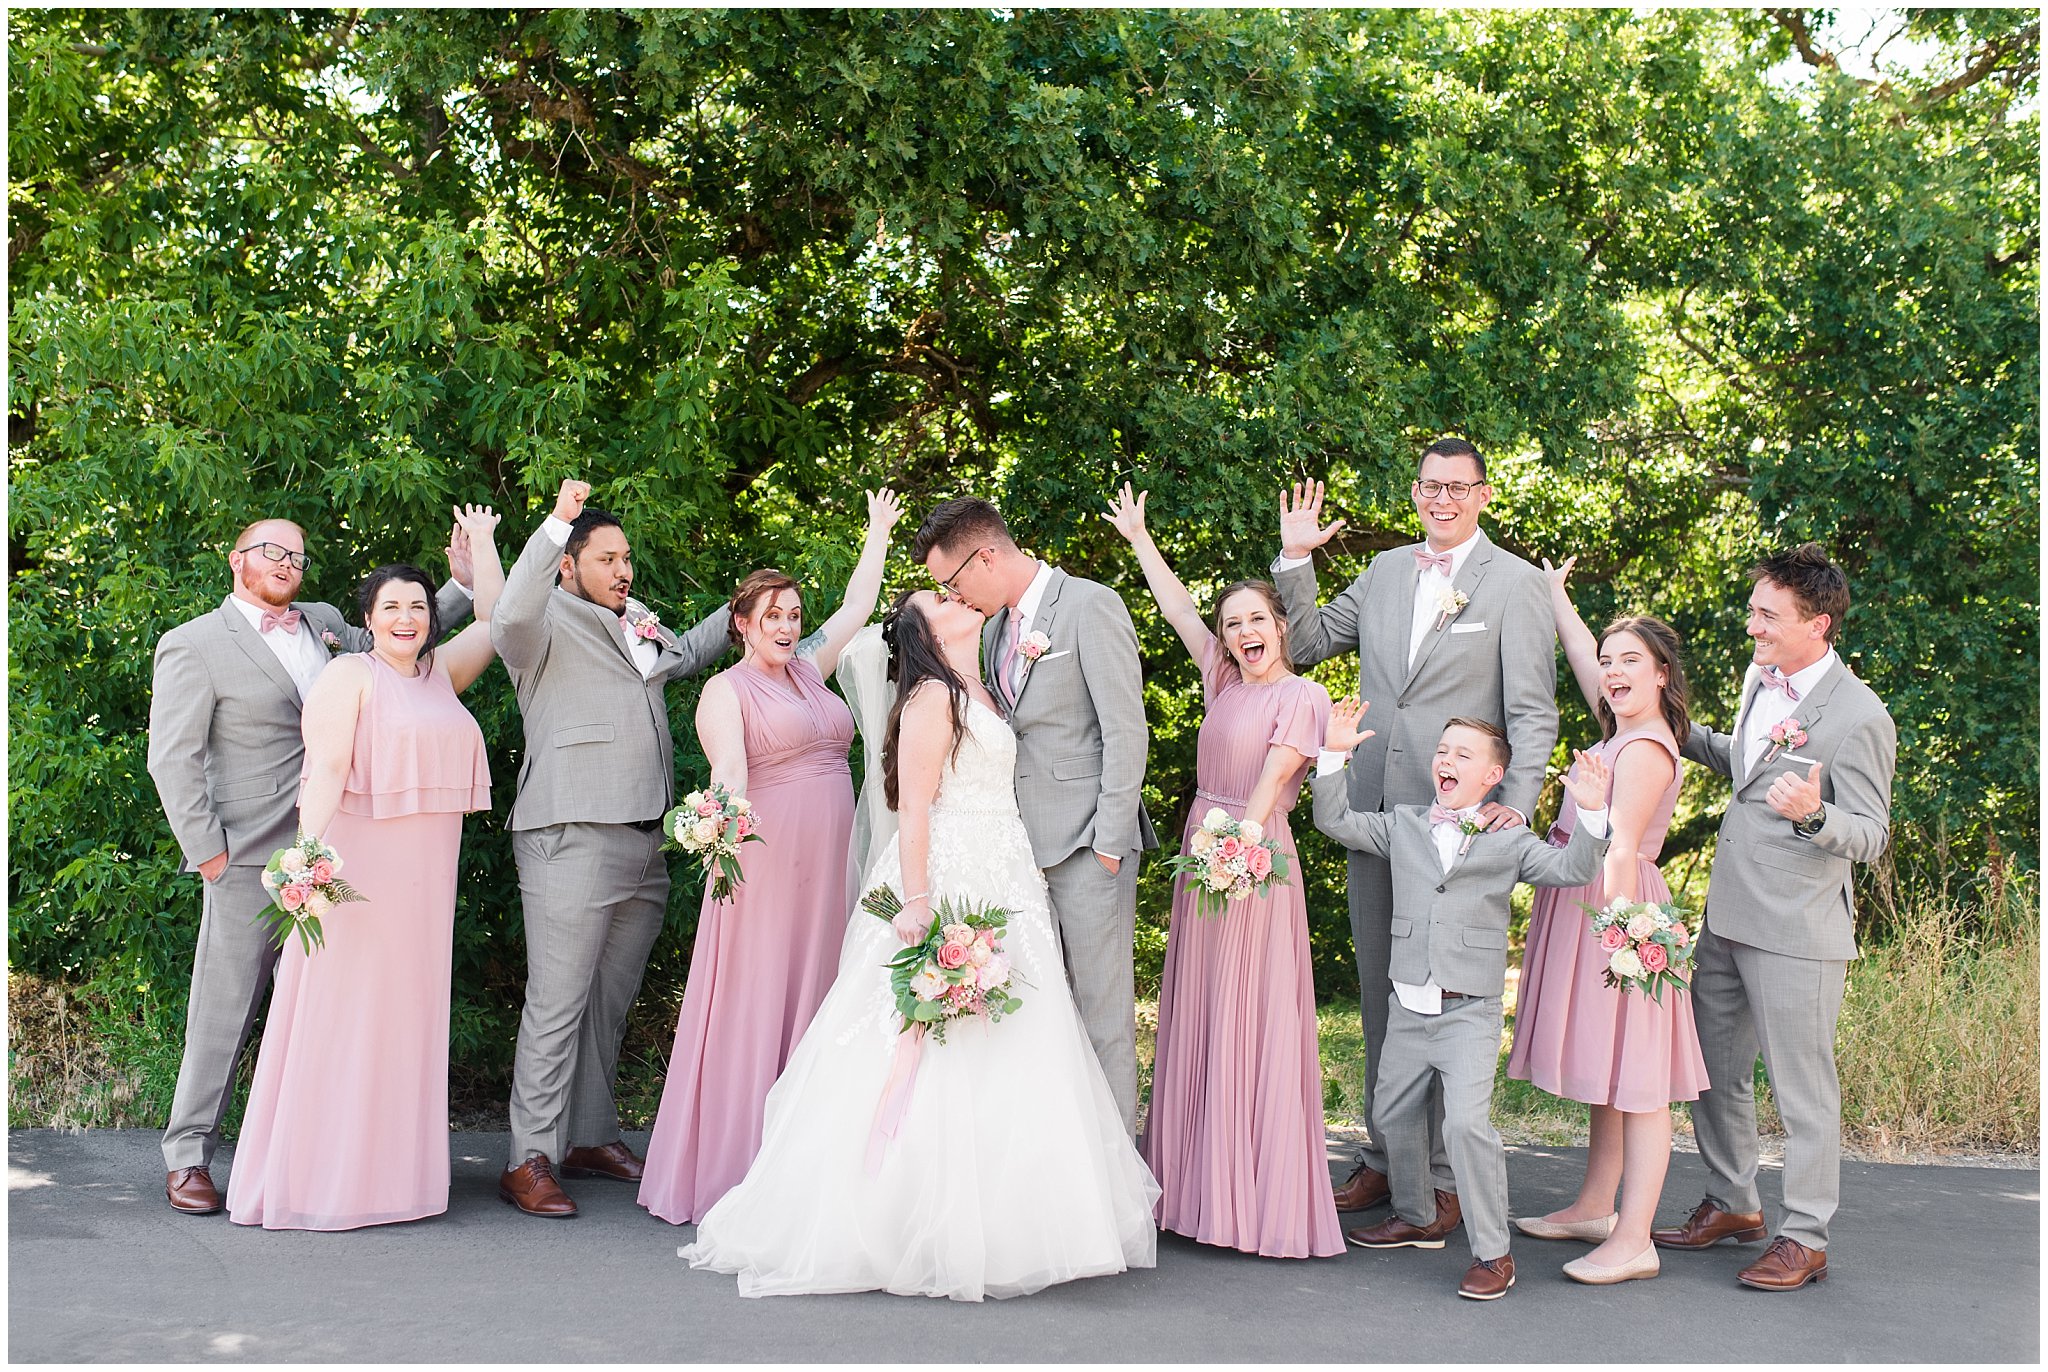 Wedding party in gray suits and dusty rose blush dresses | Oak Hills Utah Dusty Rose and Gray Summer Wedding | Jessie and Dallin Photography